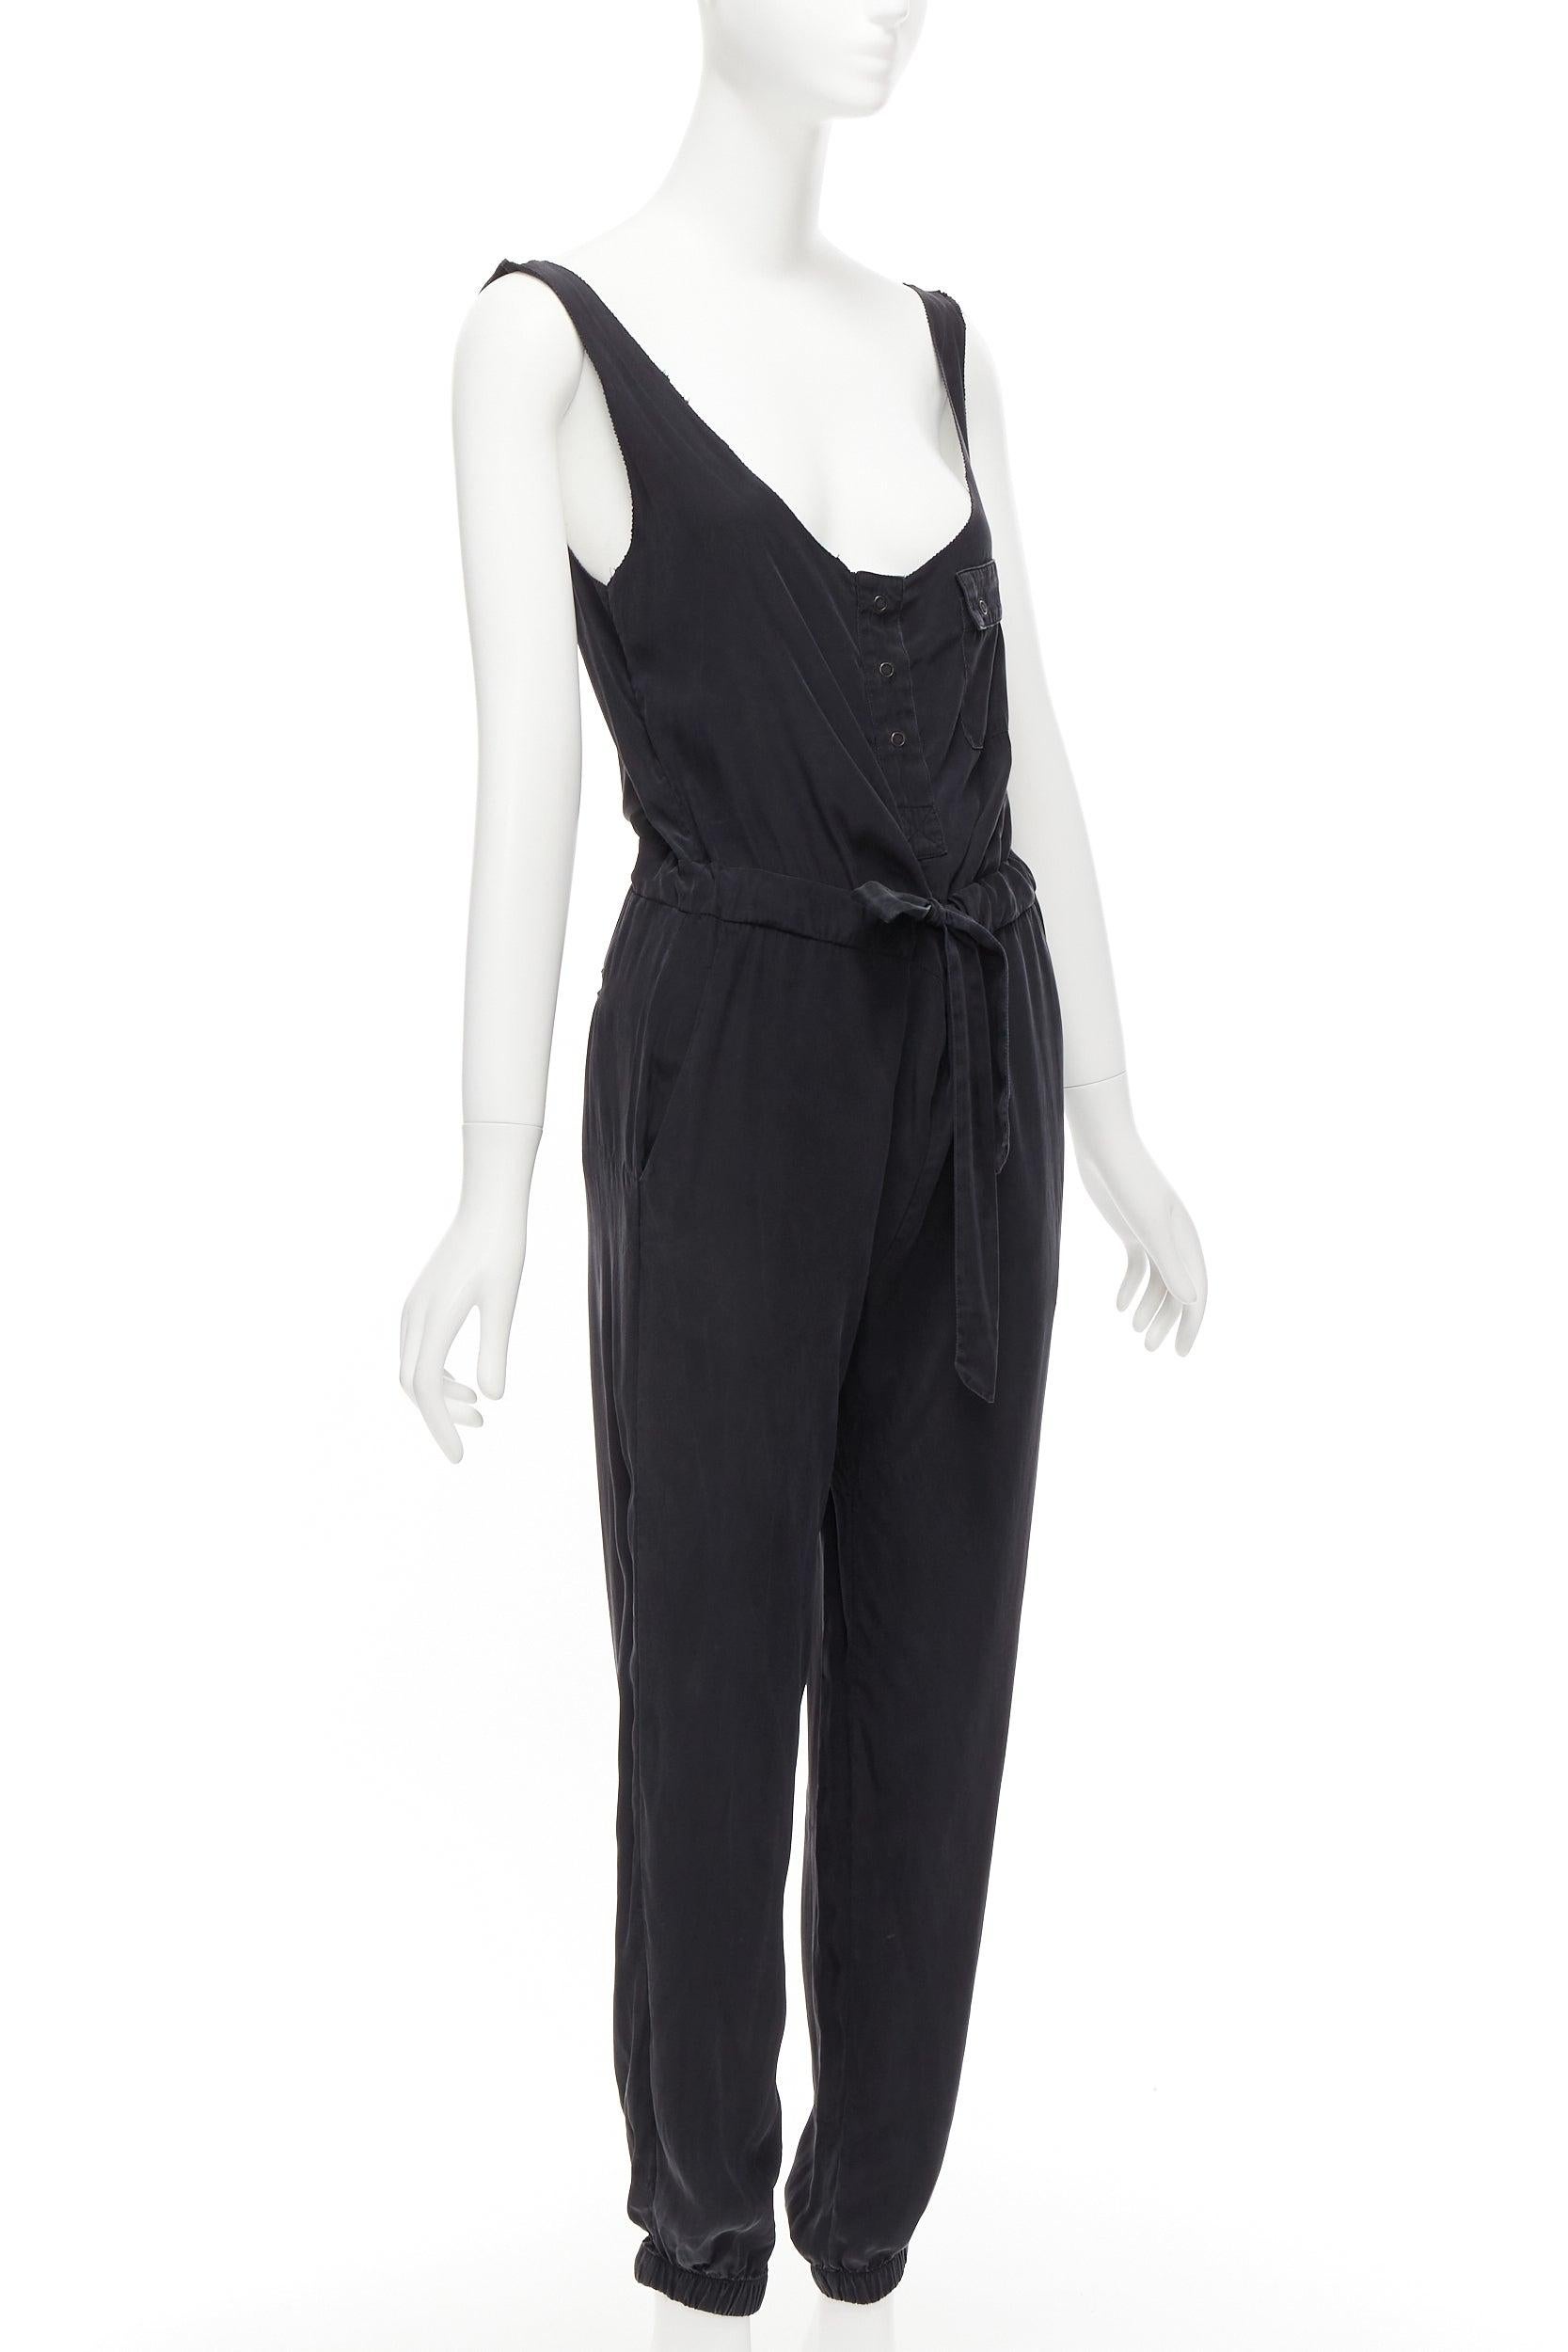 RAG & BONE 100% charmeuse silk charcoal grey belted jumpsuit US0 XS
Reference: CELG/A00394
Brand: rag & bone
Material: Silk
Color: Grey
Pattern: Solid
Closure: Snap Buttons
Extra Details: Silk waist tie. Beautiful washed effect.
Made in: United